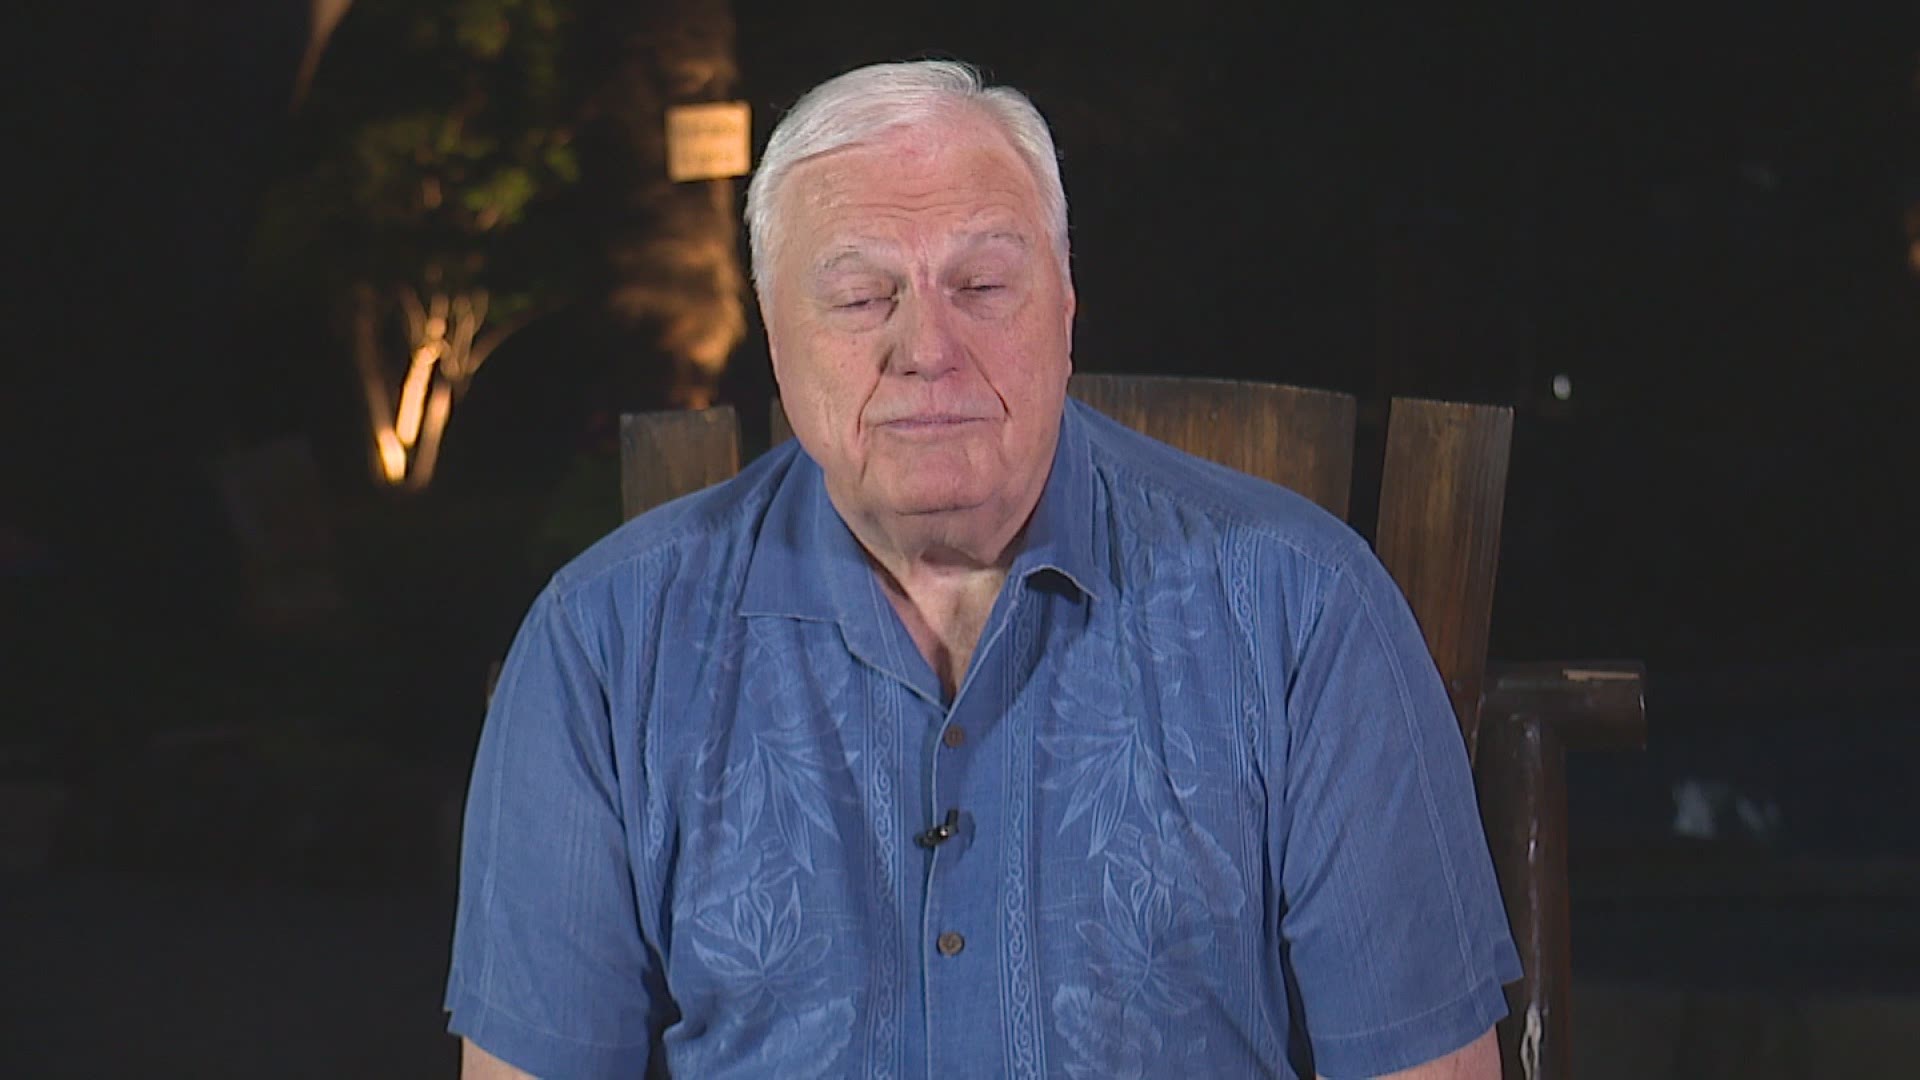 After more than 38 years, Dale Hansen will retire from WFAA on Sept. 2.